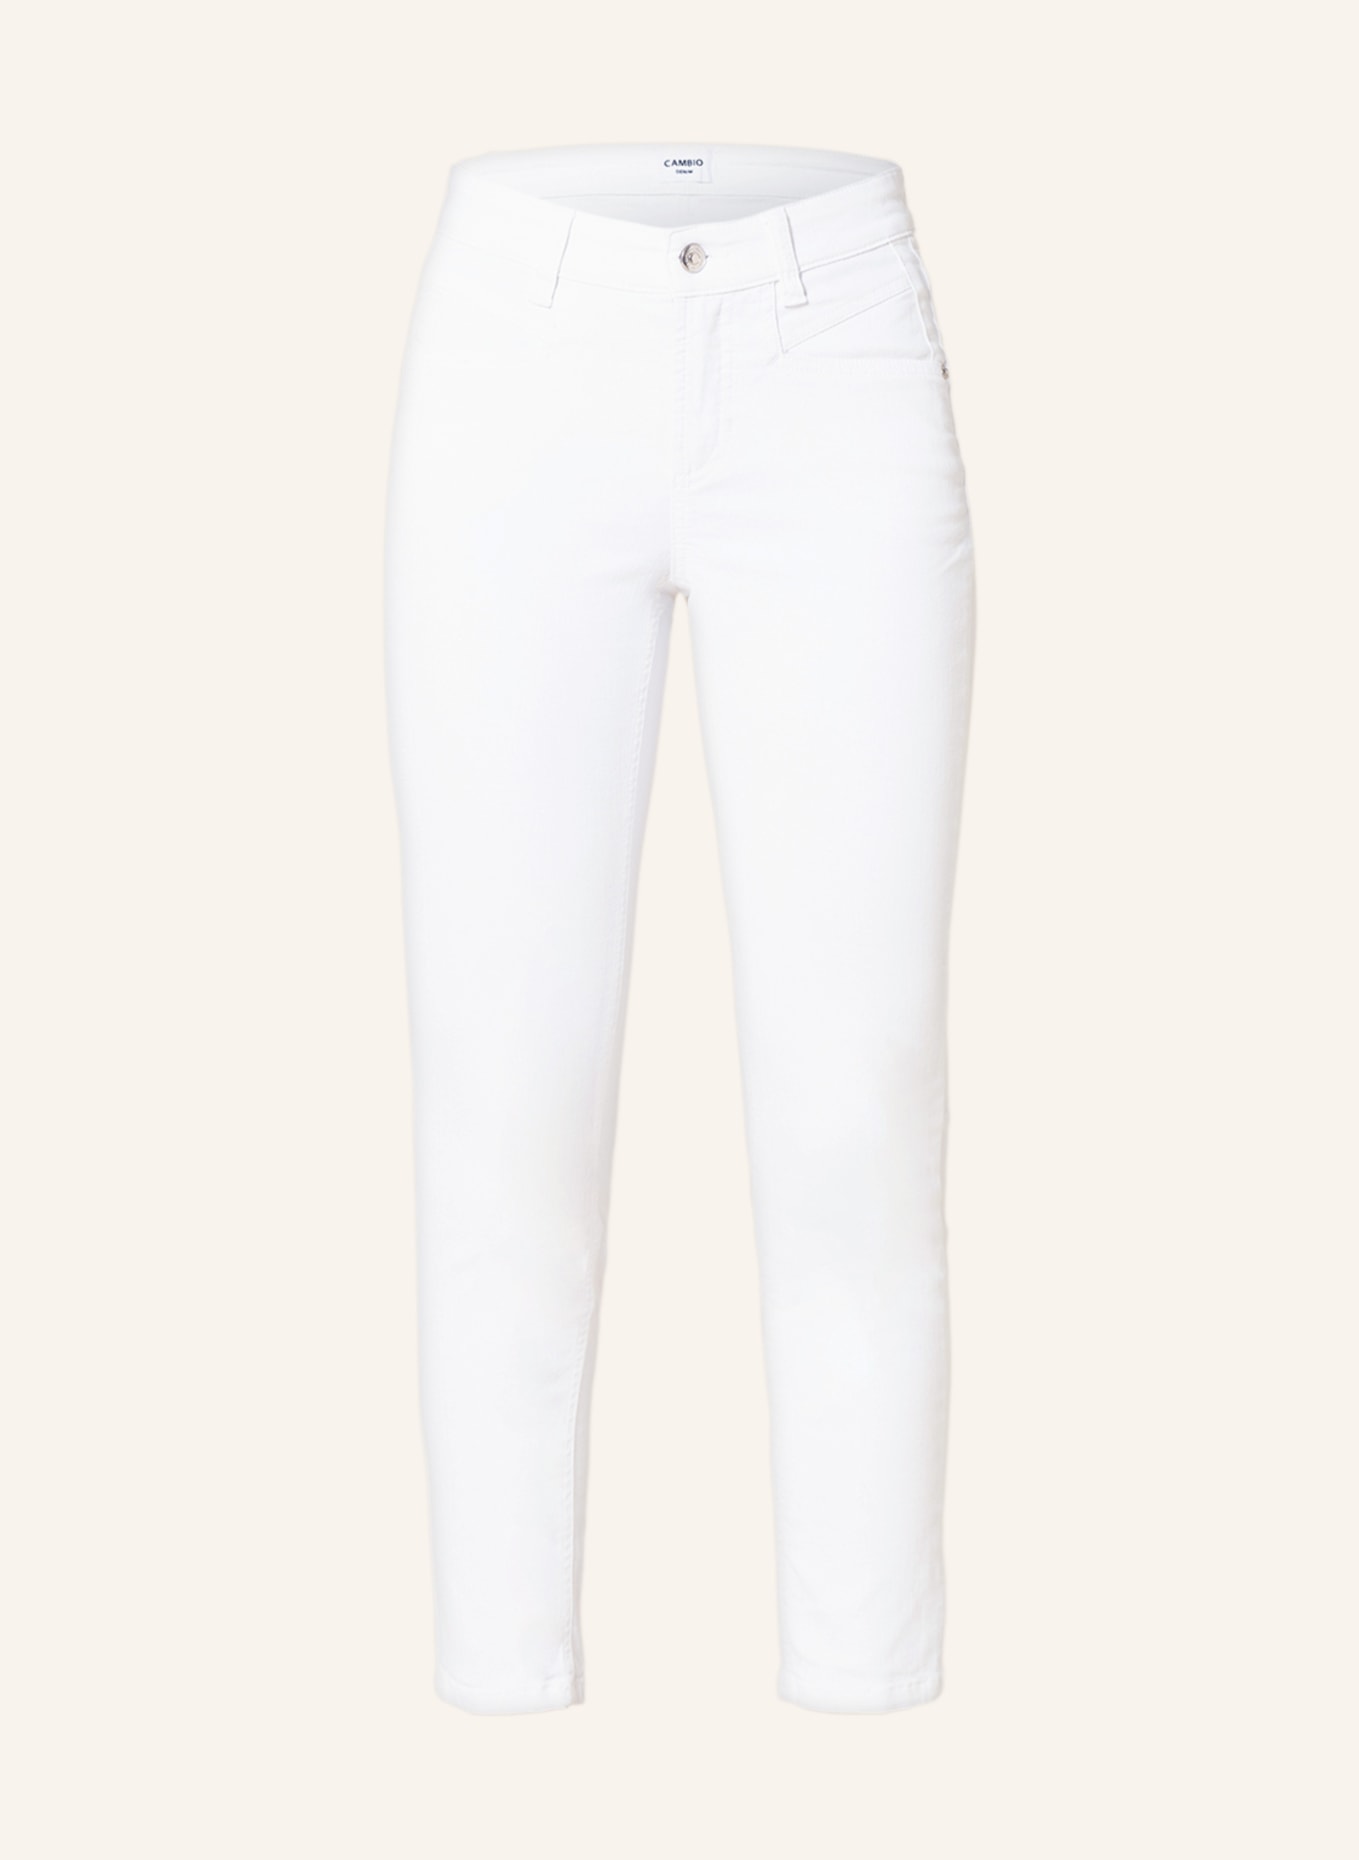 CAMBIO Skinny jeans PINA in 5002 softwash